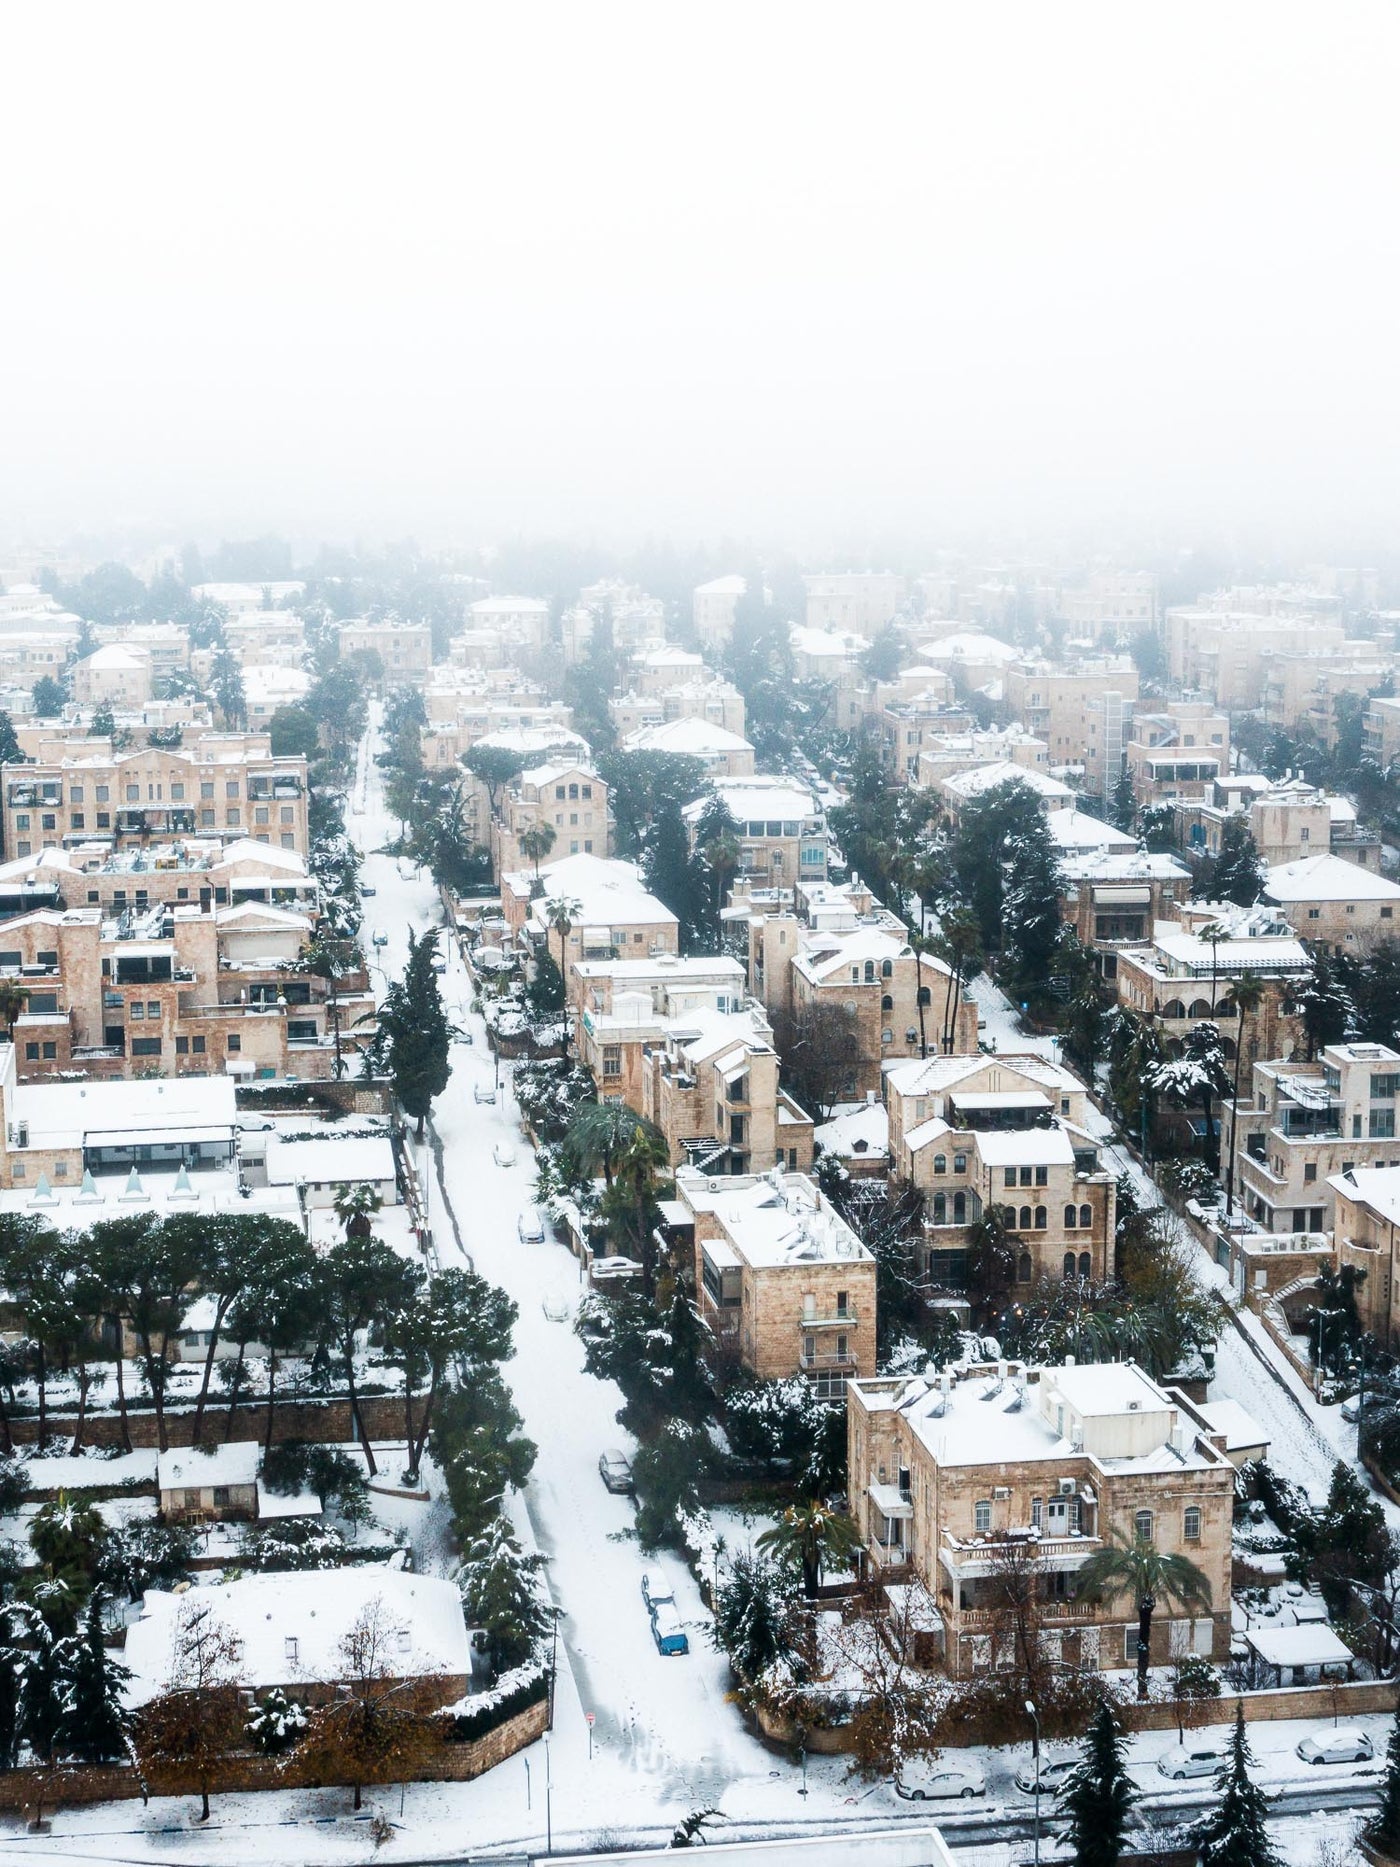 Silent Haze - By Yehoshua Aryeh - Photograph of Israel - Jerusalem Covered in Snow